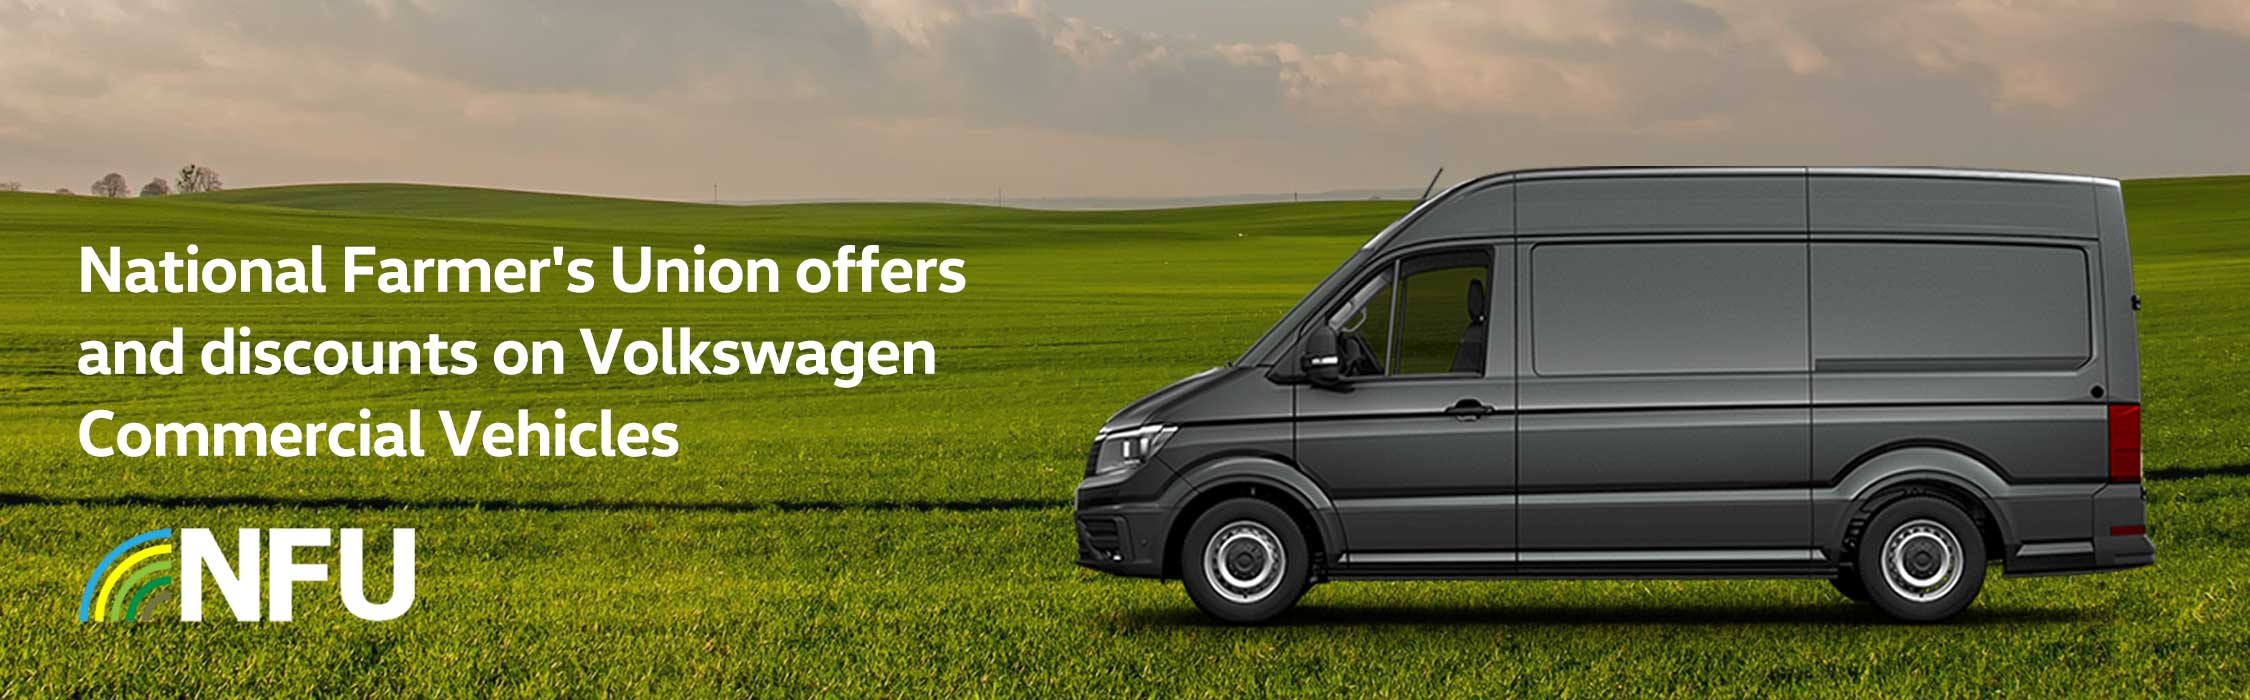 National Farmers Union Volkswagen Commercial Vehicles Offers